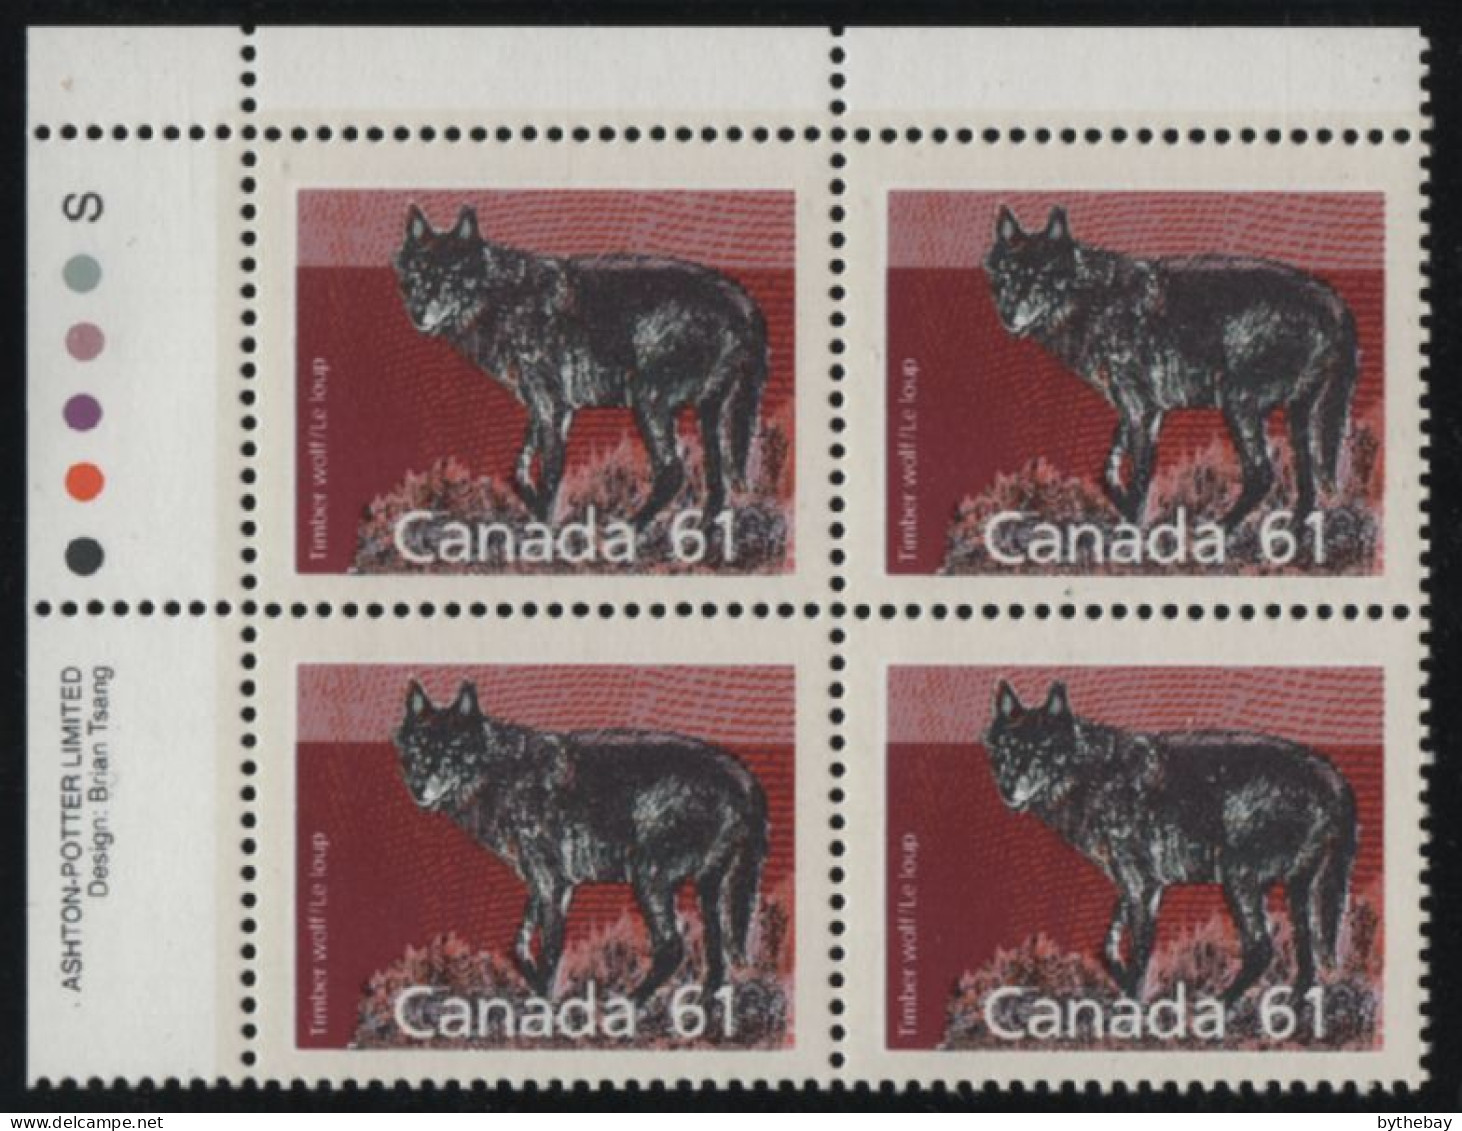 Canada 1988-92 MNH Sc 1175 61c Timber Wolf UL Plate Block - Num. Planches & Inscriptions Marge